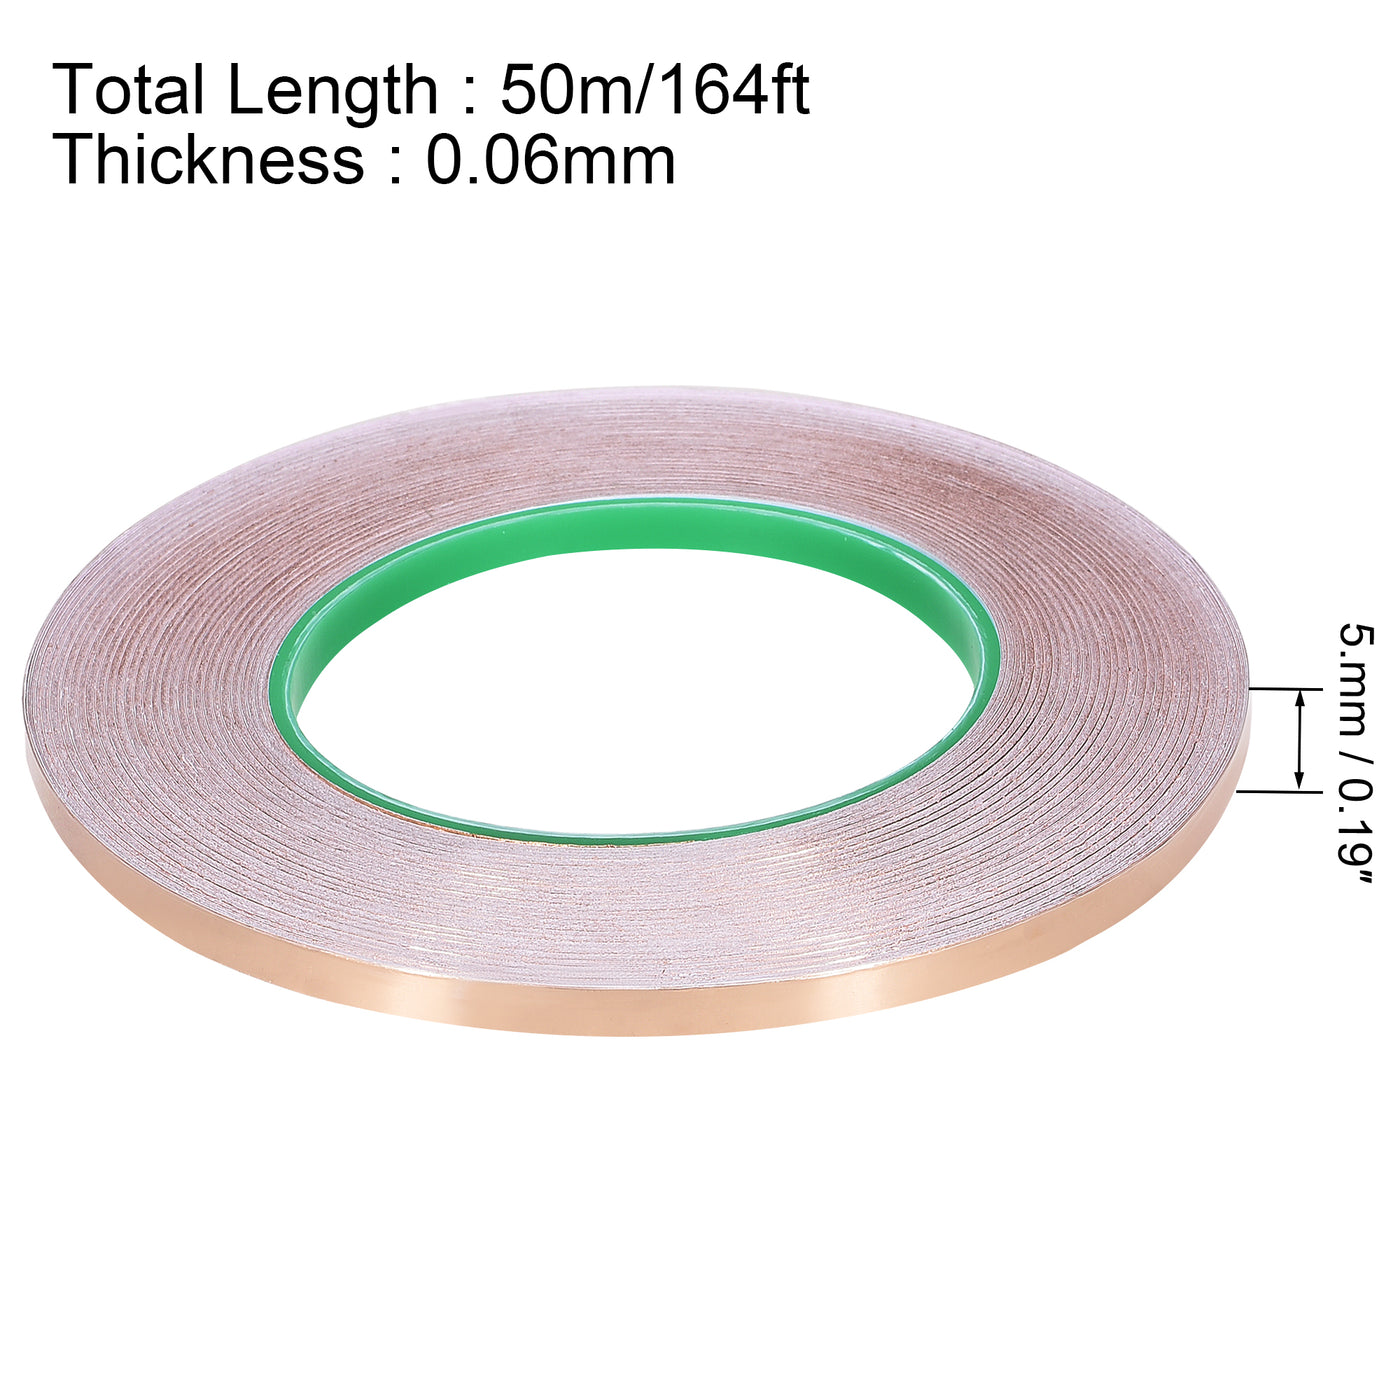 uxcell Uxcell Double-Sided Conductive Tape Copper Foil Tape 5mm x 50m/164ft for EMI Shielding 1pcs